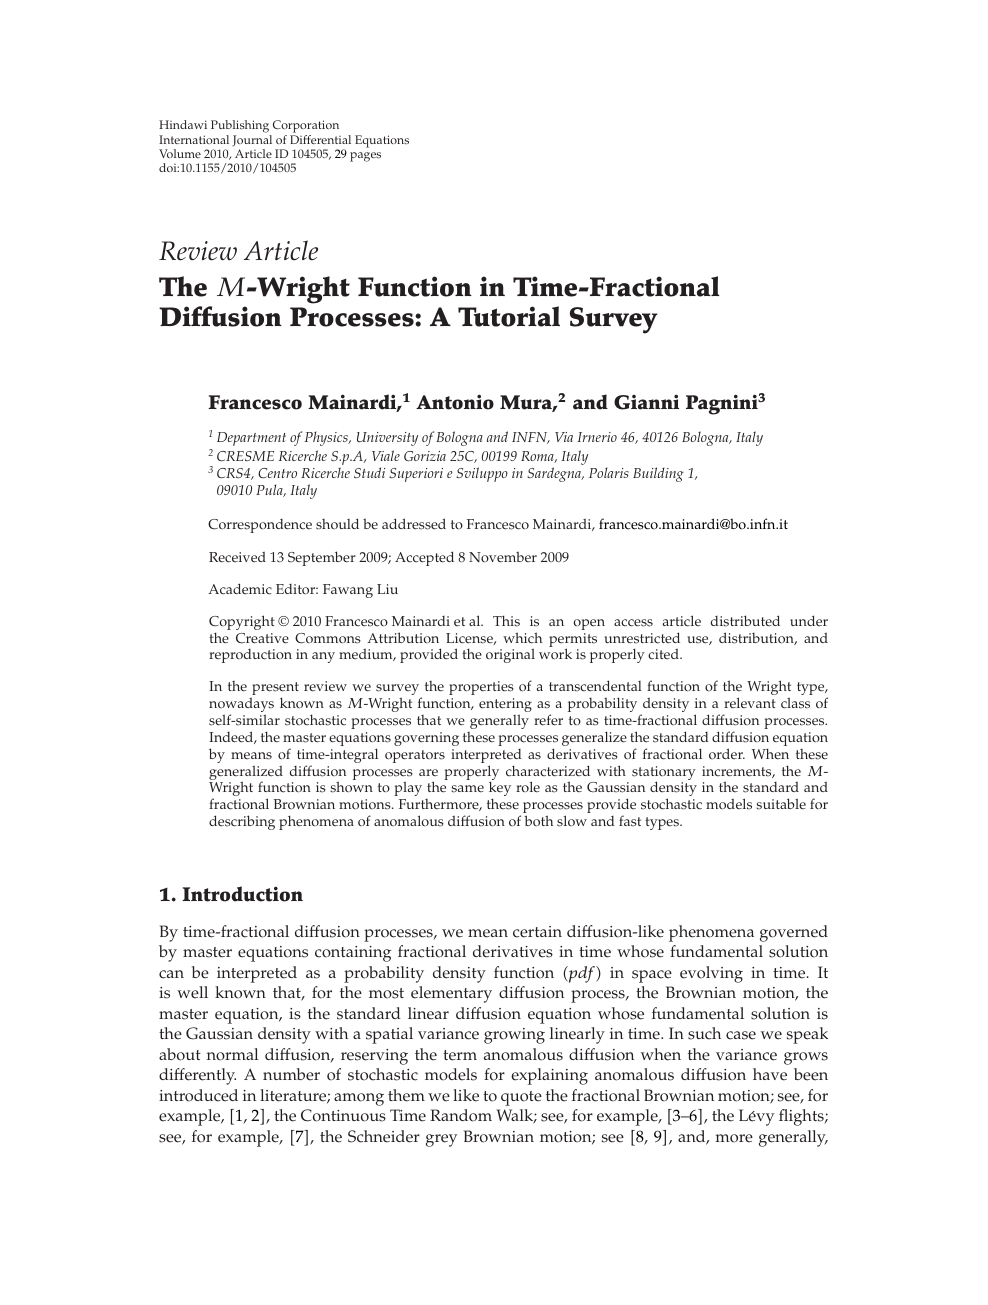 The 𝑀 Wright Function In Time Fractional Diffusion Processes A Tutorial Survey Topic Of Research Paper In Mathematics Download Scholarly Article Pdf And Read For Free On Cyberleninka Open Science Hub